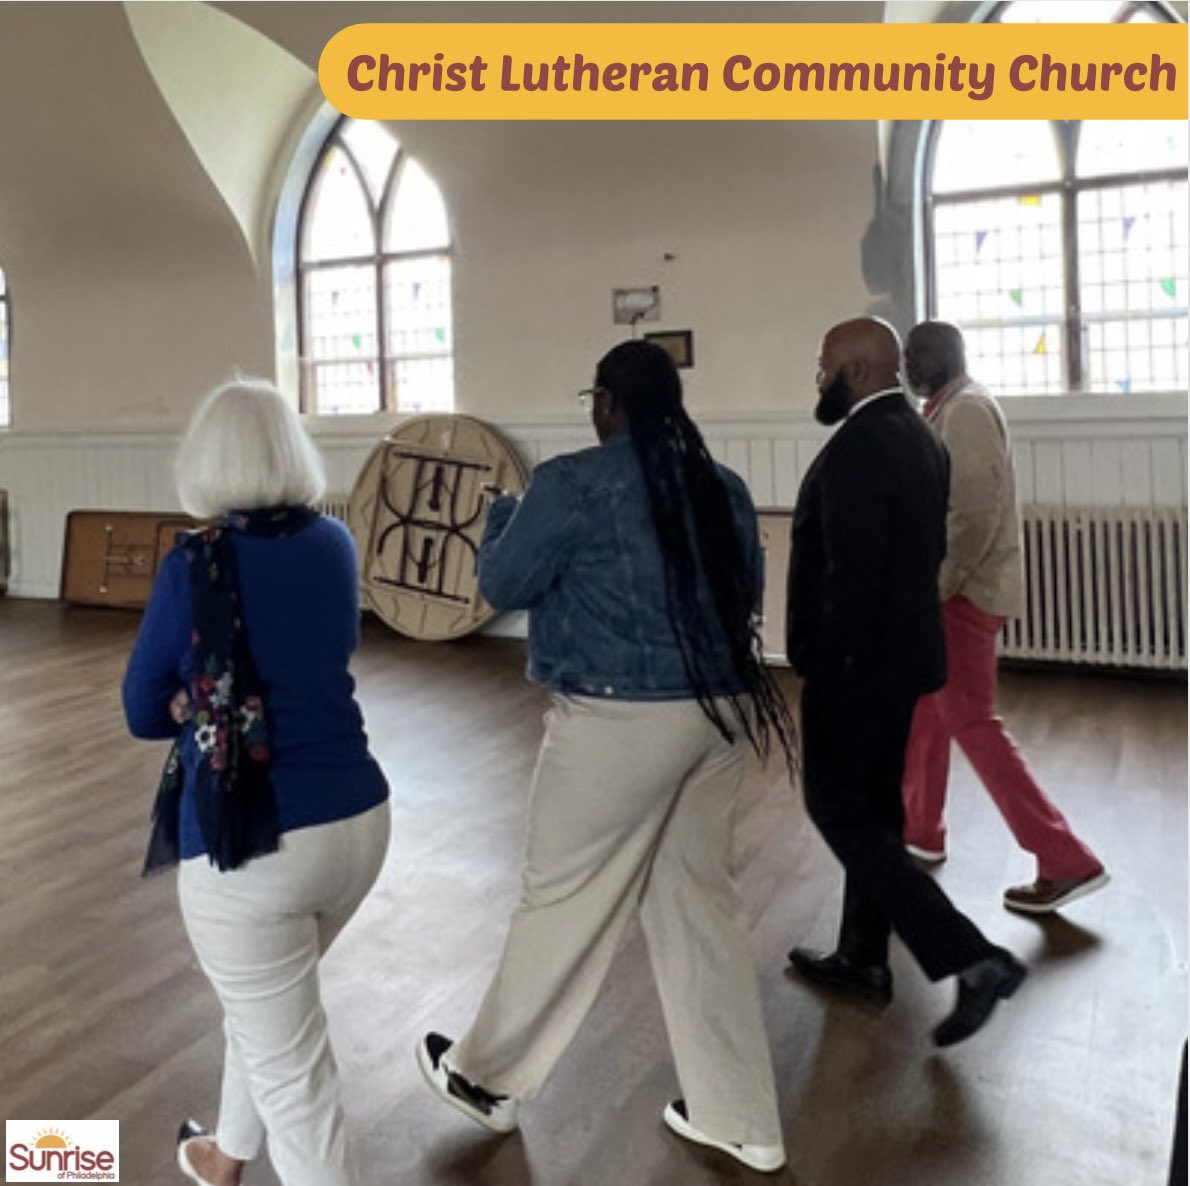 🌟 Exciting News! 🌟 Sunrise of Philadelphia is expanding into Upper Darby! Today, our leadership met with Christ Lutheran Community Church and Upper Darby's Mayor and CAO to kickstart this journey. Thrilled to partner with such pillars in the community! Stay tuned for updates!